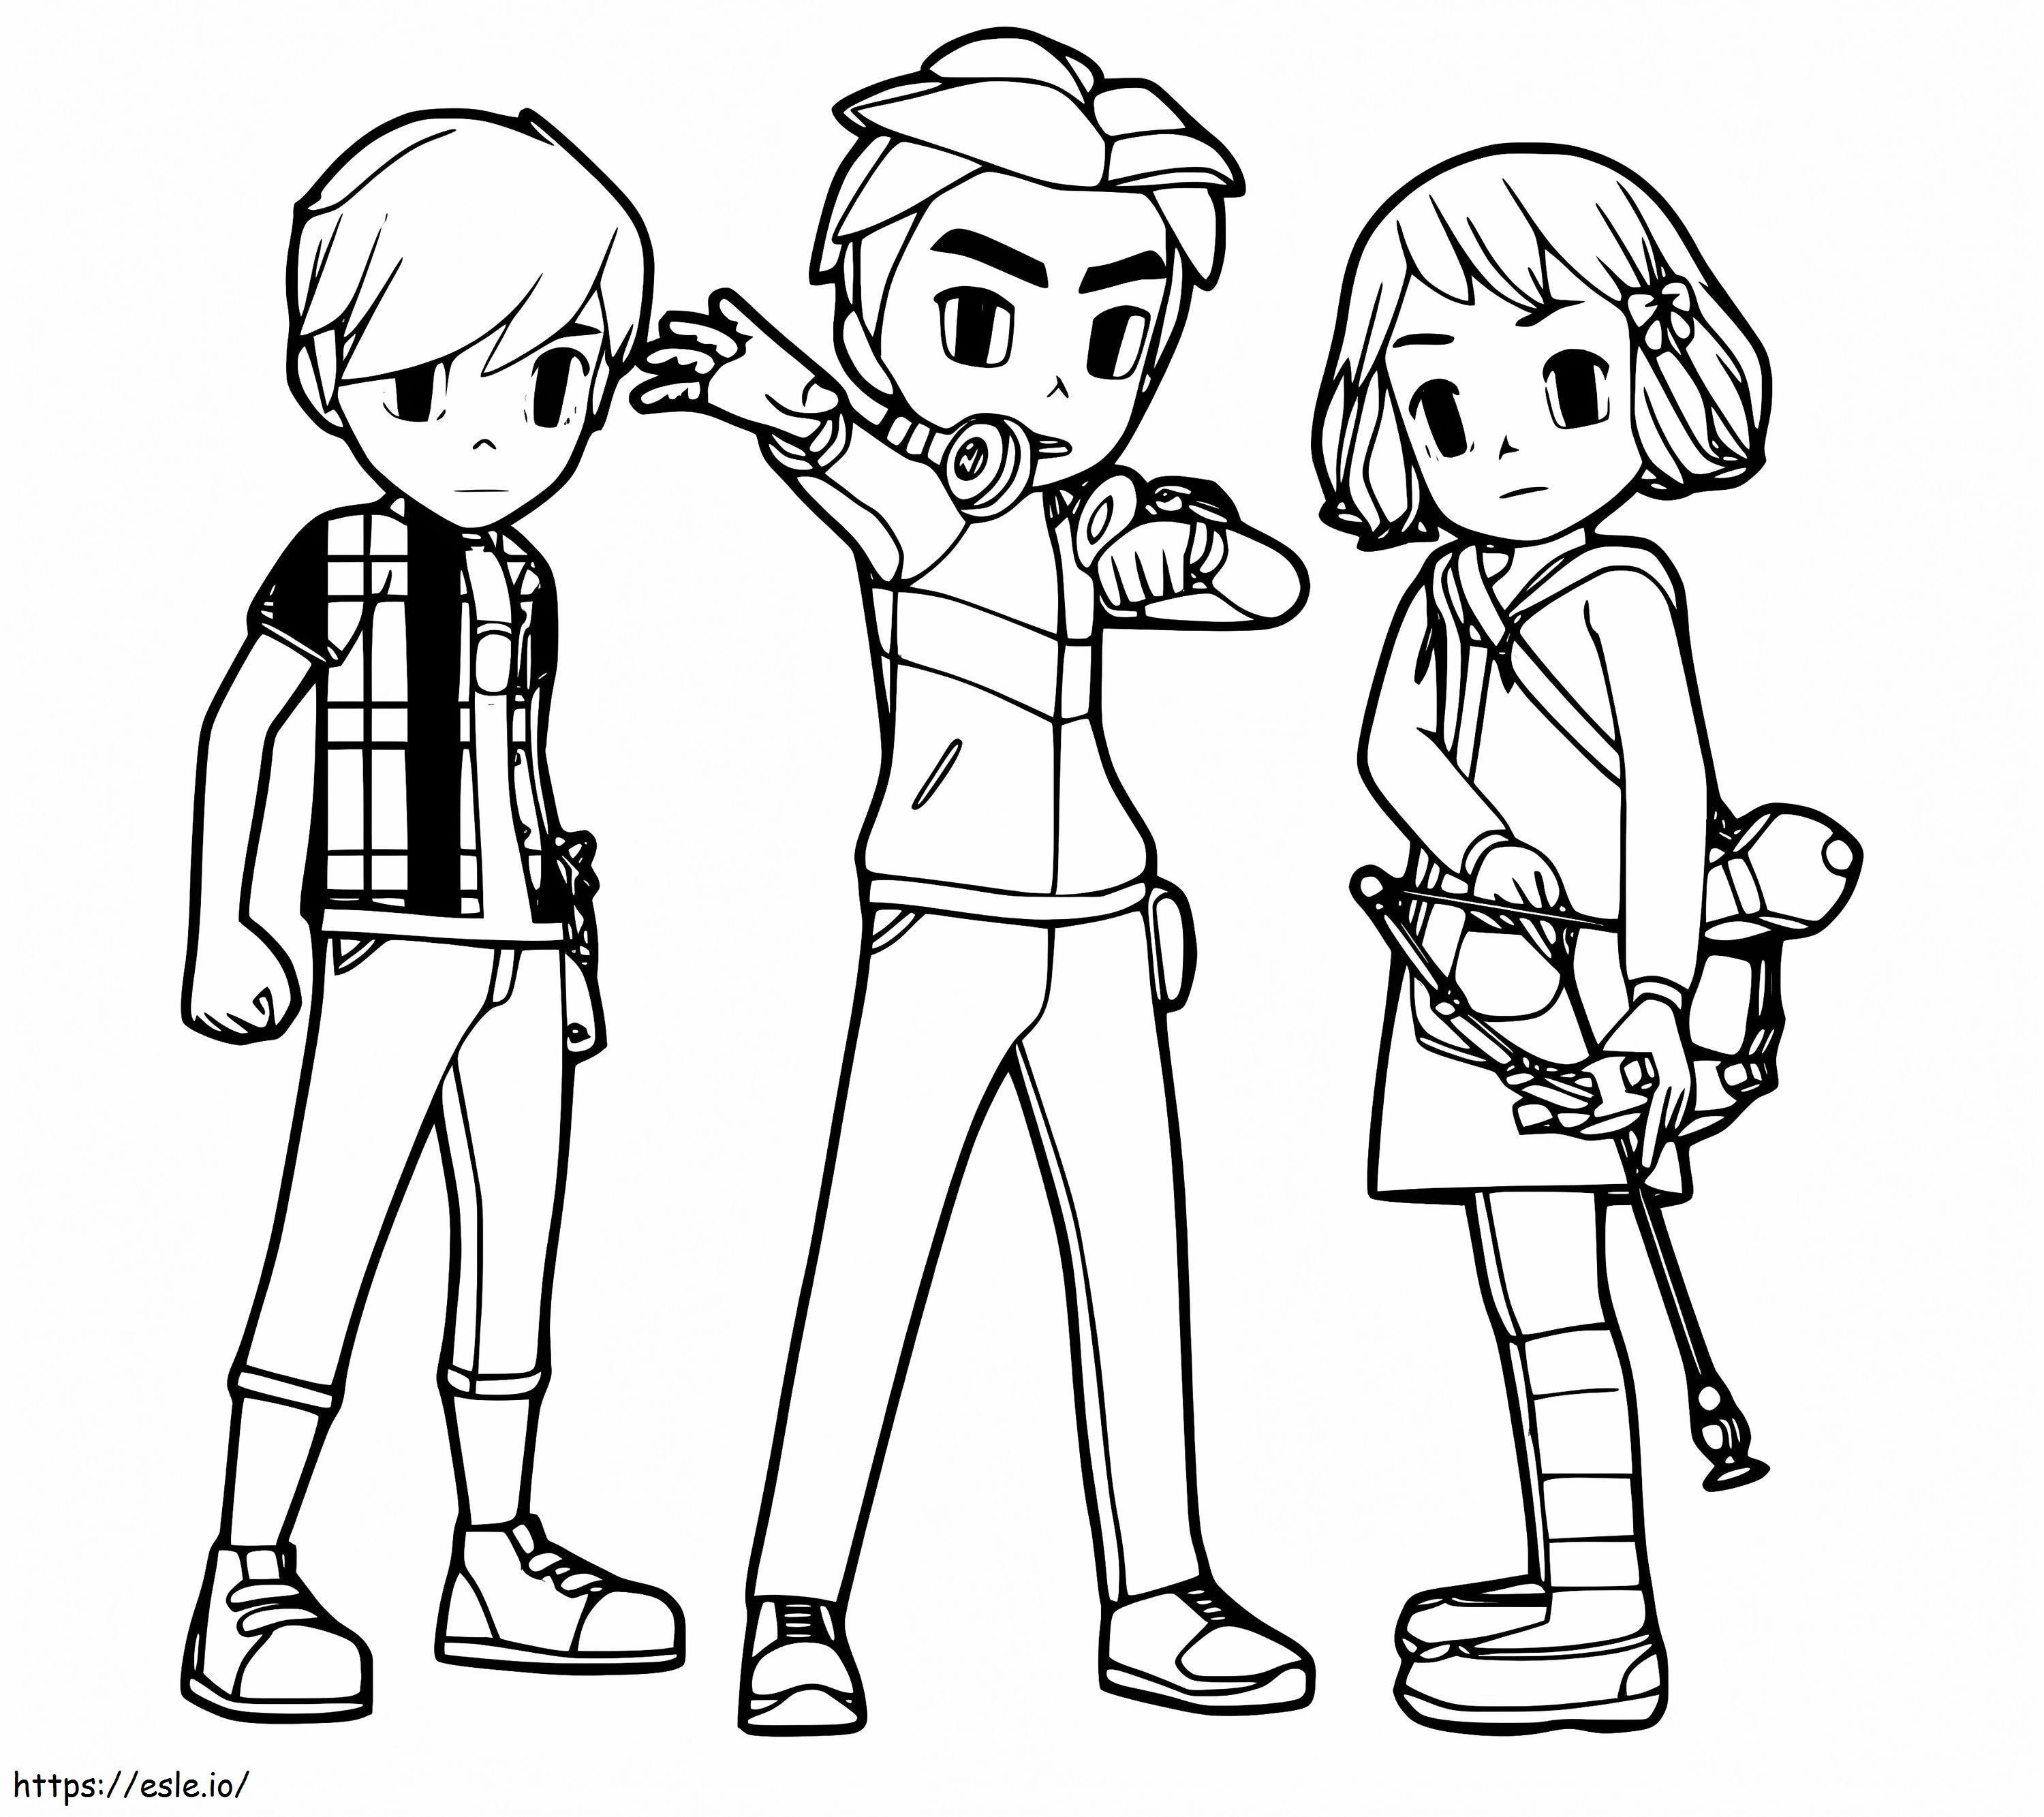 Ryan Dylan And Dolly coloring page